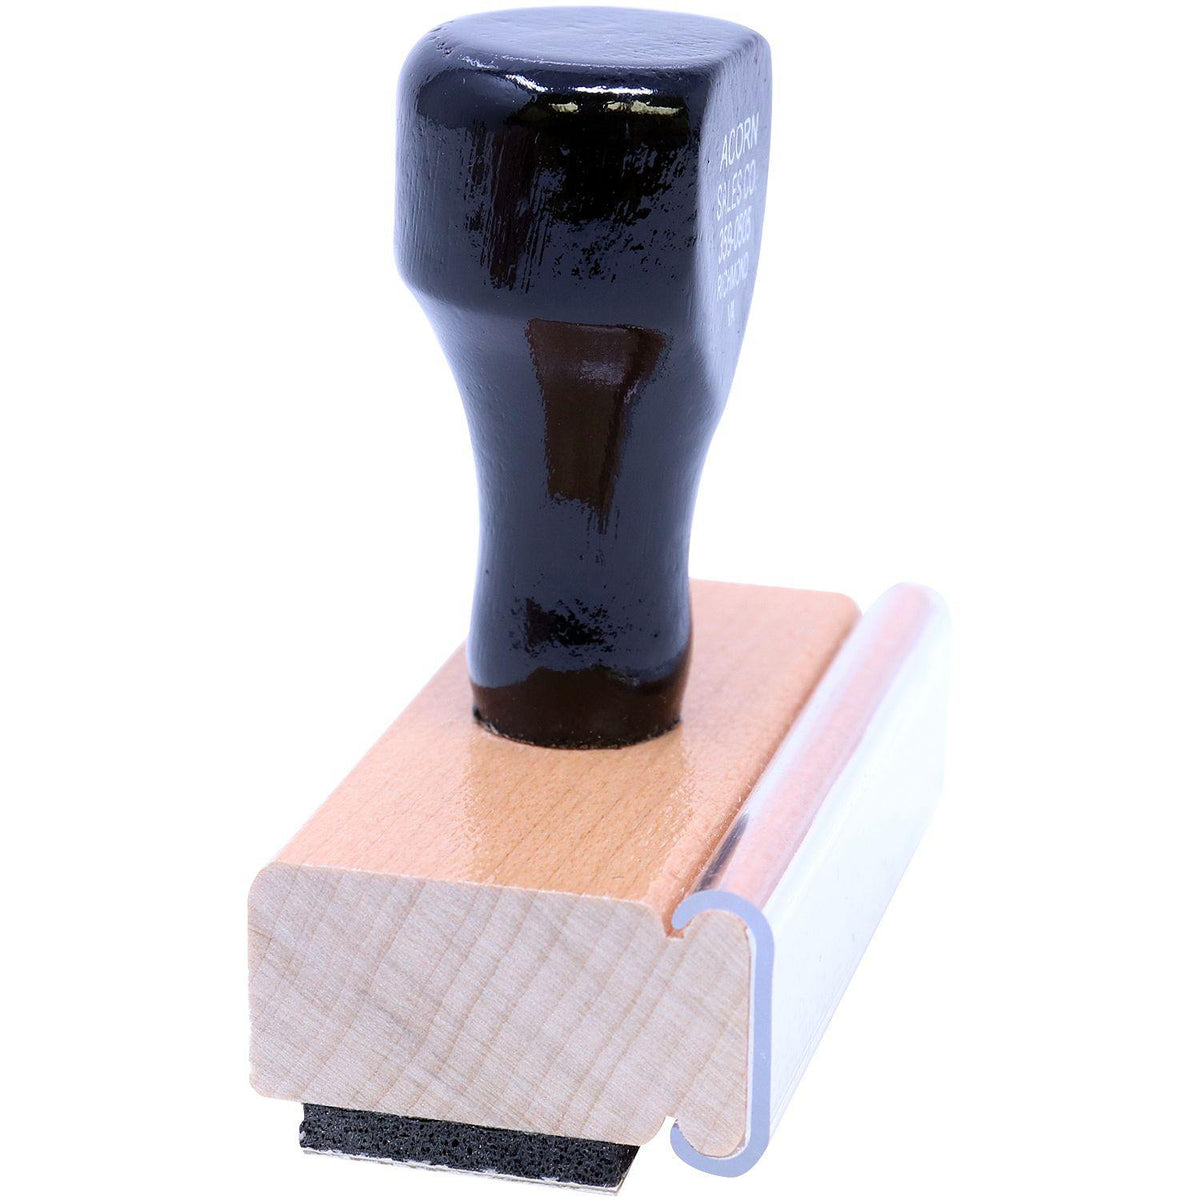 Read Route Rubber Stamp - Engineer Seal Stamps - Brand_Acorn, Impression Size_Small, Stamp Type_Regular Stamp, Type of Use_Office